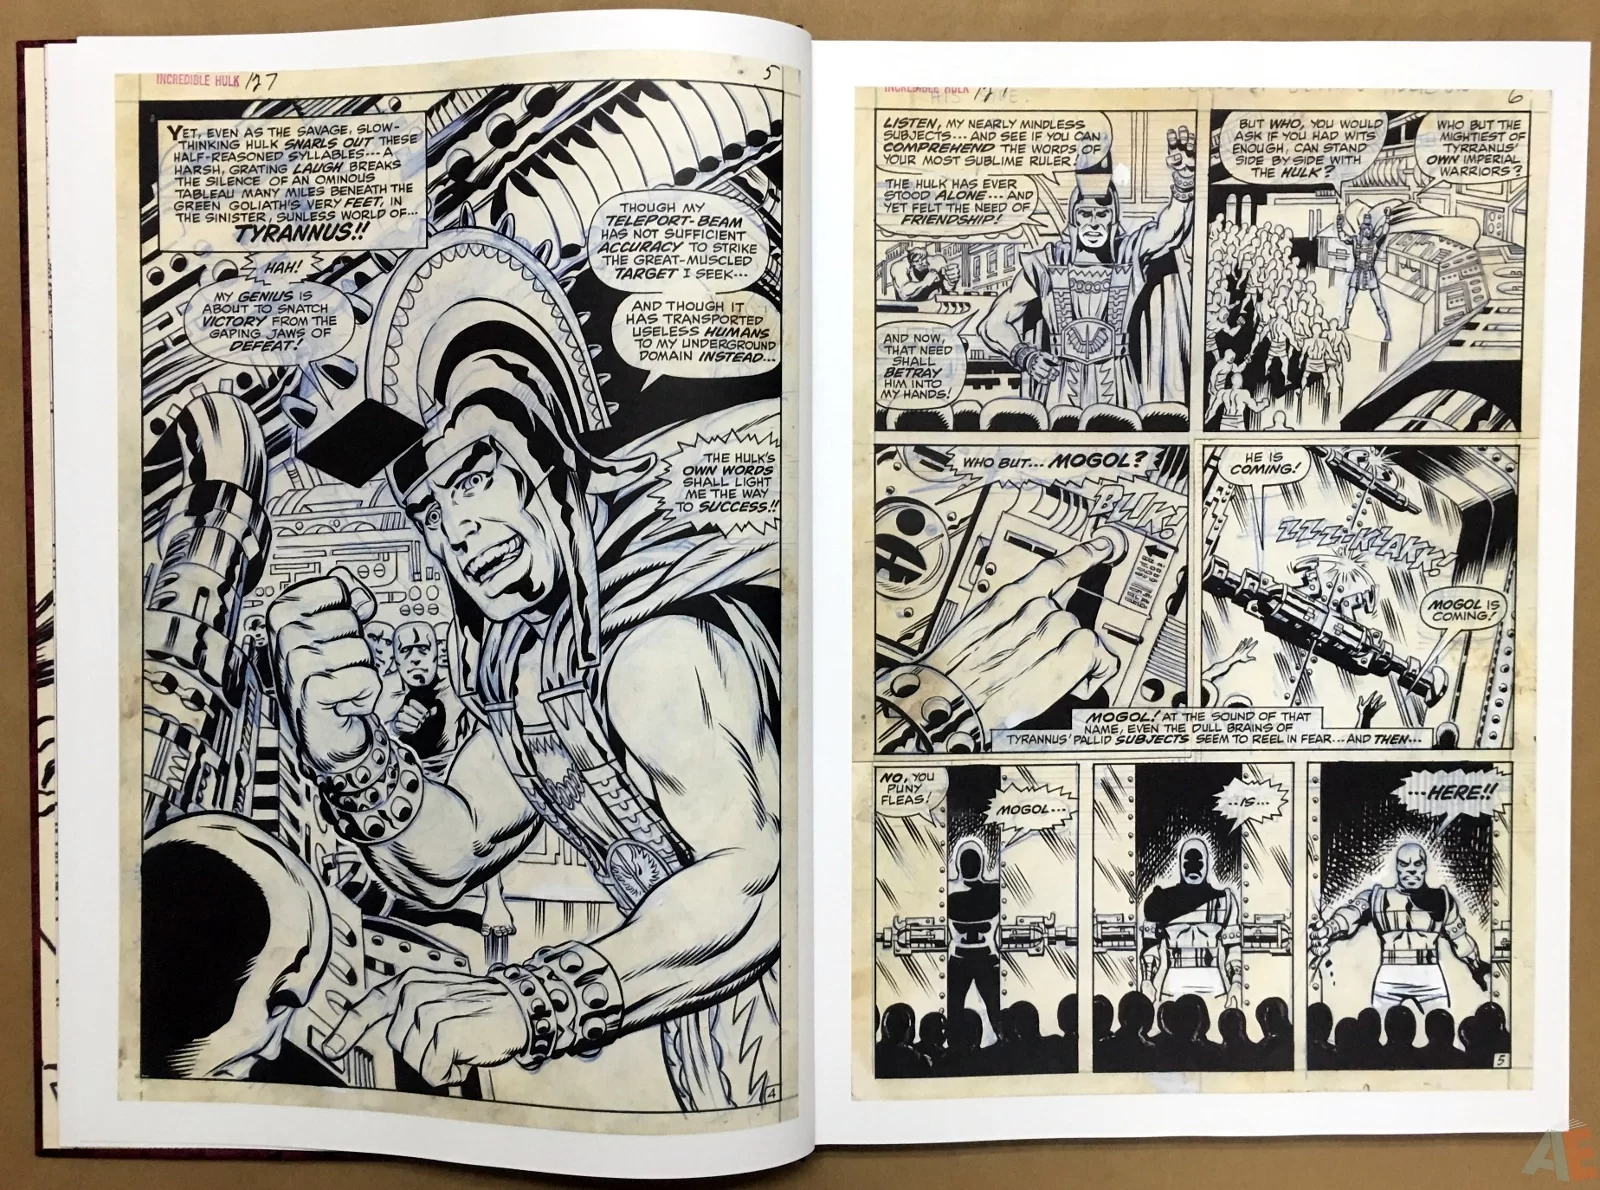 Herb Trimpe’s The Incredible Hulk Artist’s Edition